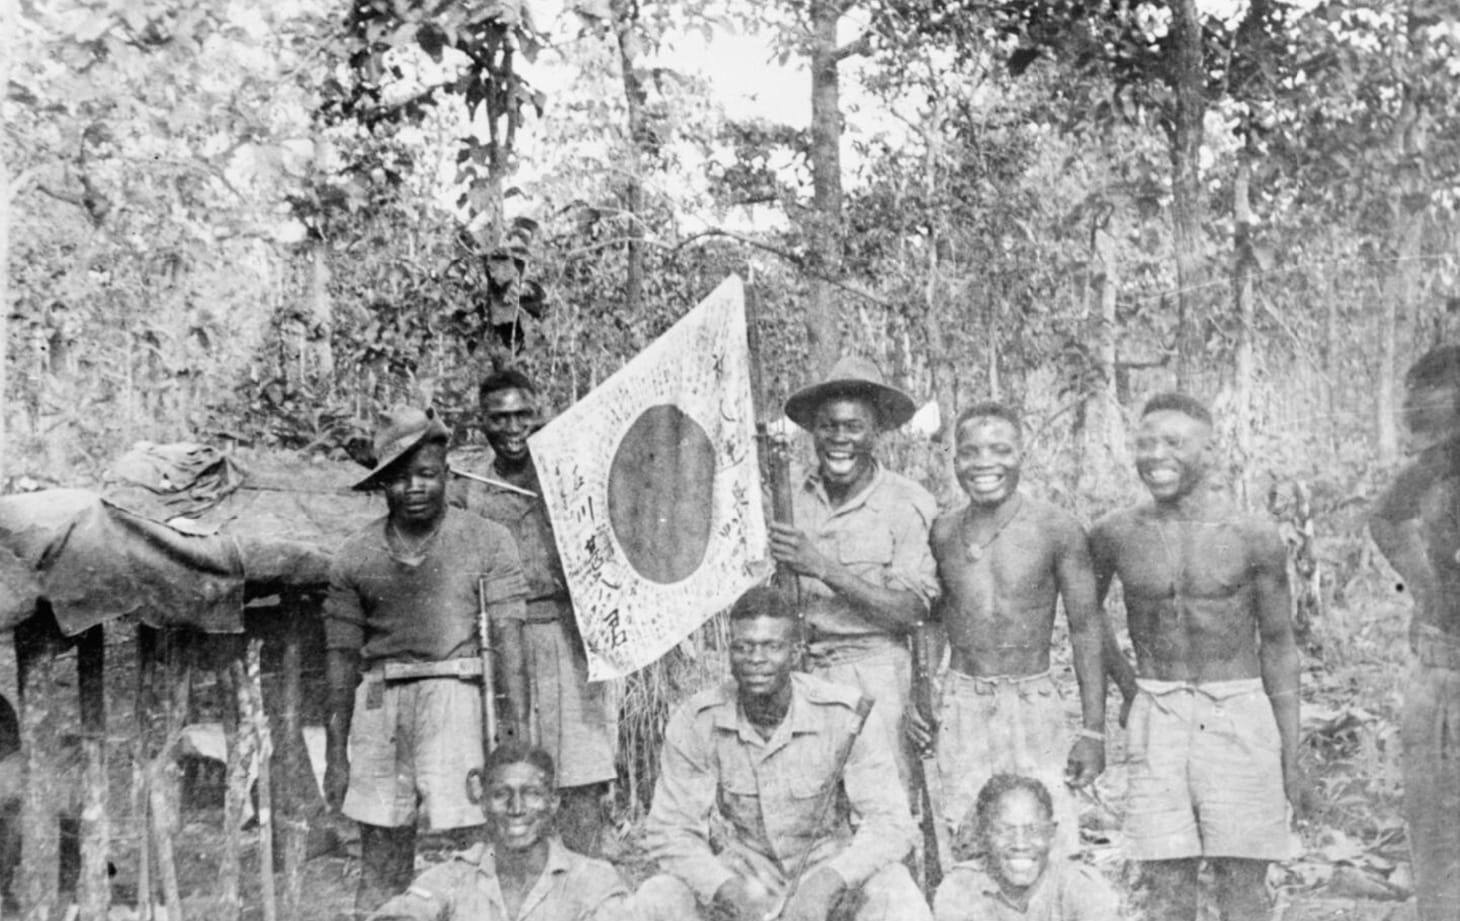 “Conscious of Myself as a Kenya African”: The Effect of the Second World War on Colonial African Soldiers